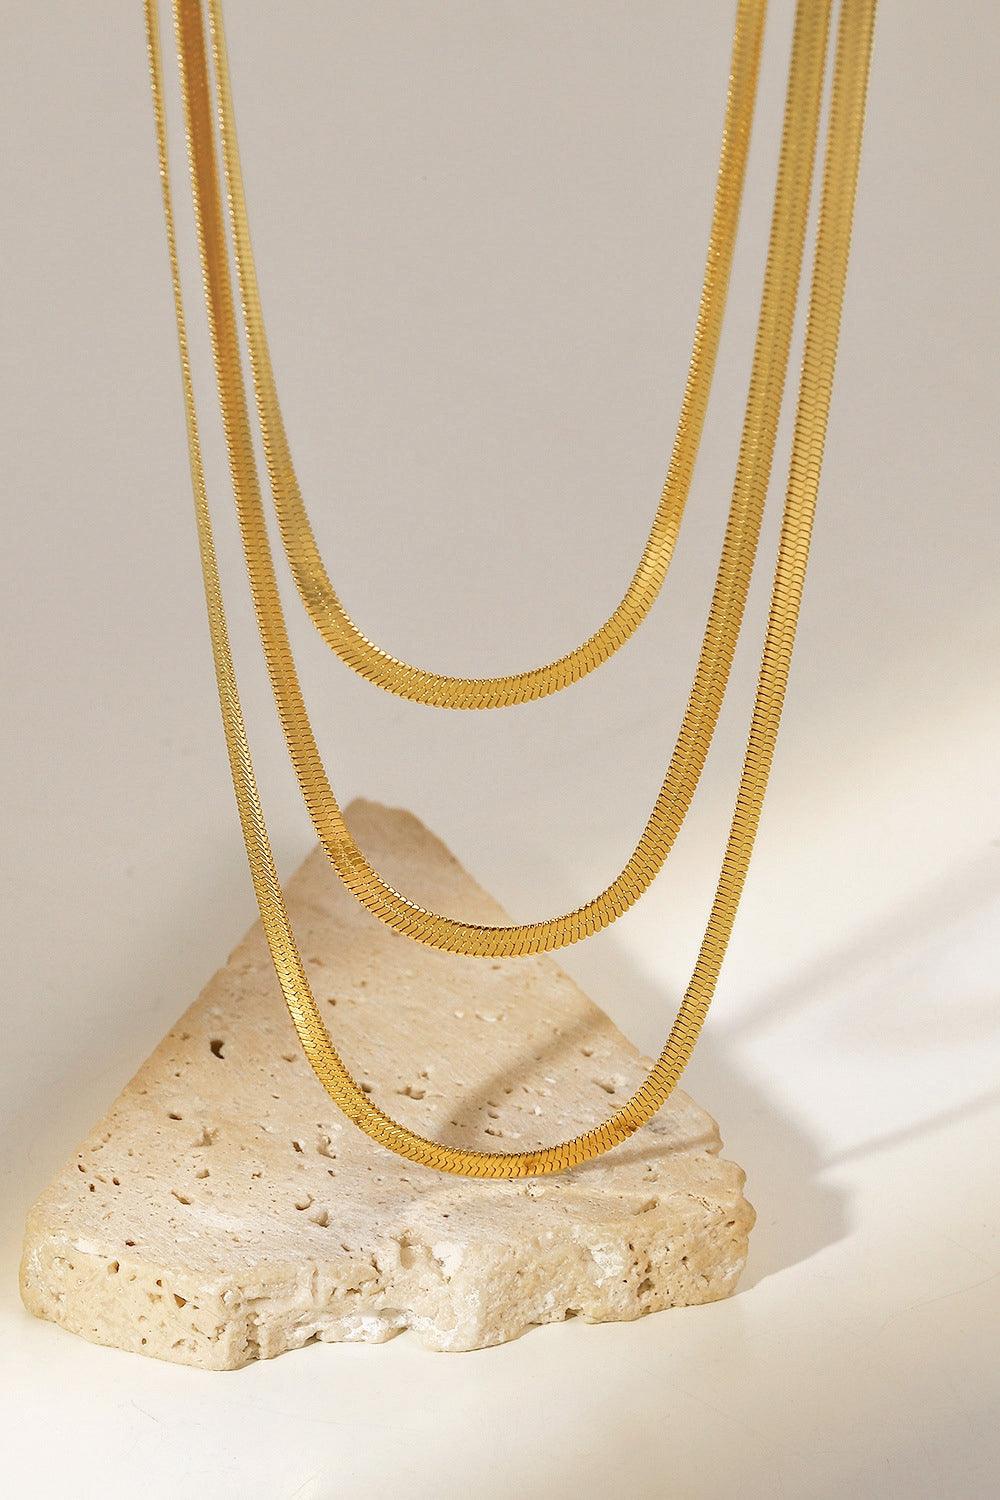 Triple-Layered Snake Chain Necklace - Glamorous Boutique USA L.L.C.